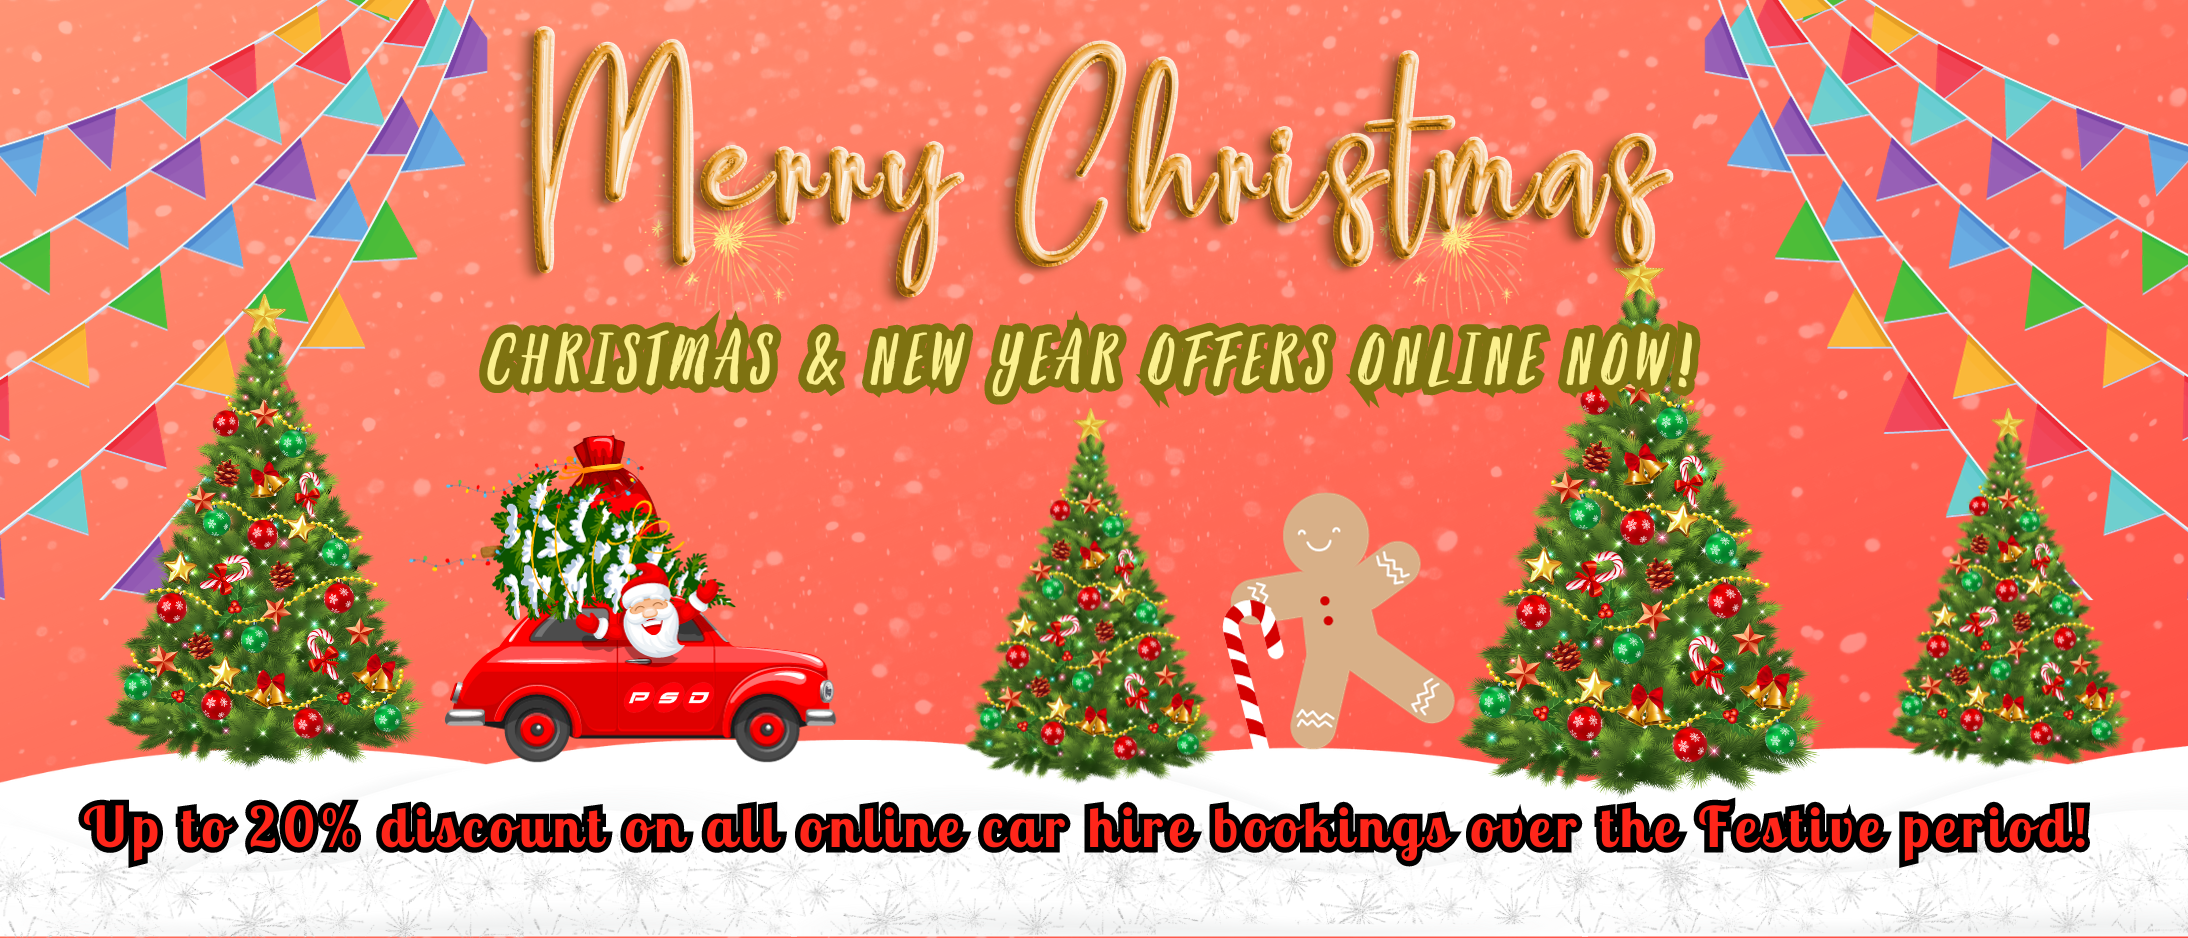 Christmas and New Year Offer (1000 x 300 px)HD